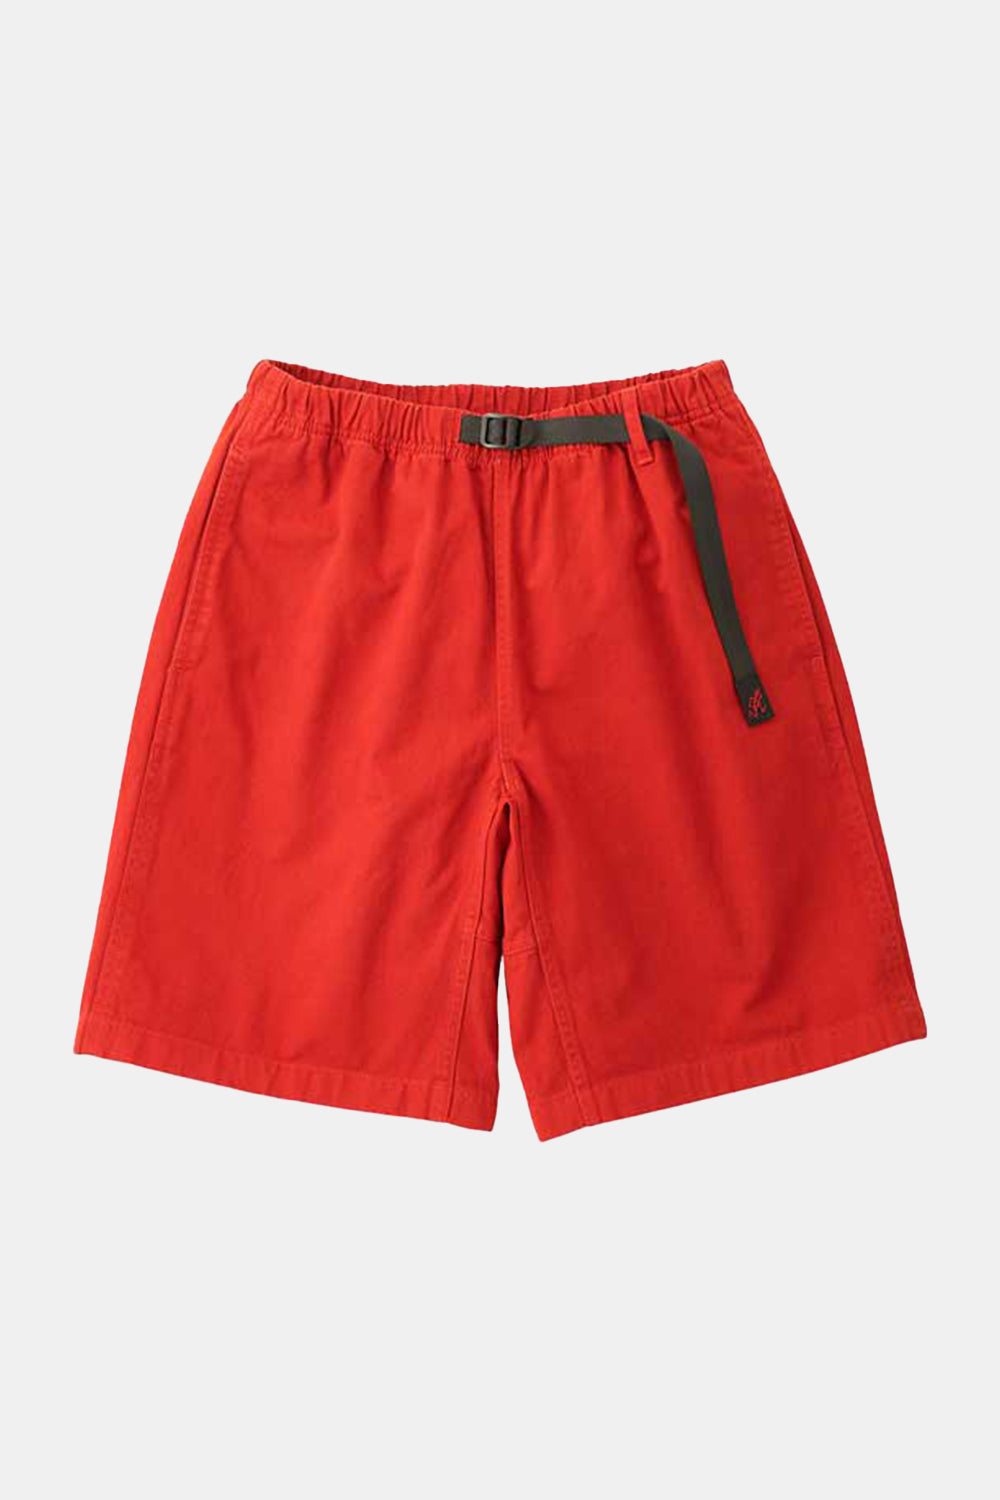 Gramicci G-Shorts Double-ringspun Organic Cotton Twill (Dusty Red)